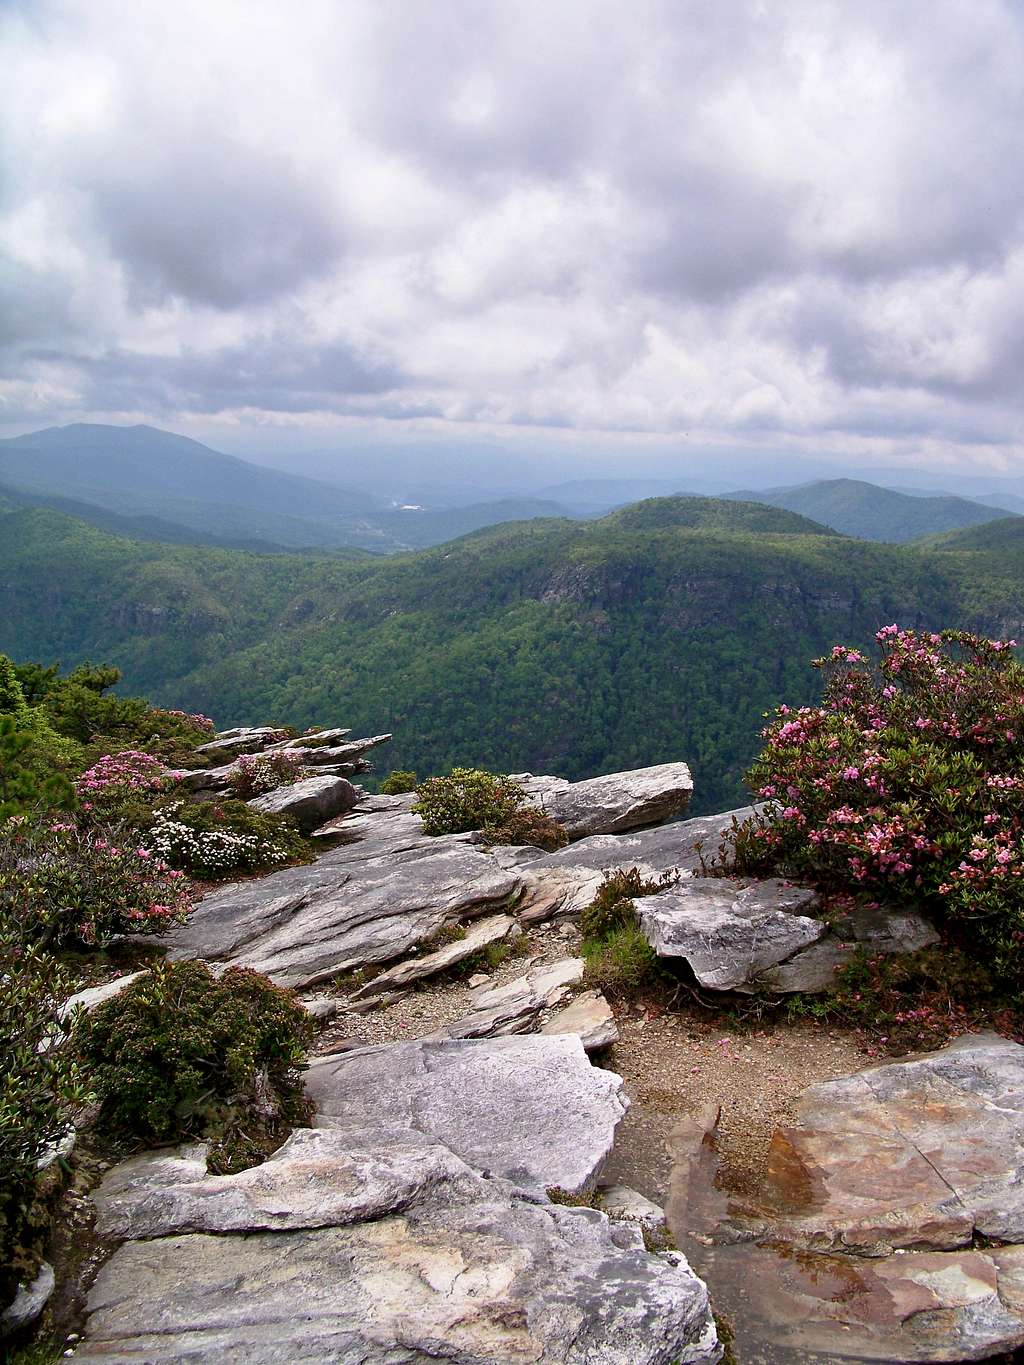 View from the Hawksbill Summit